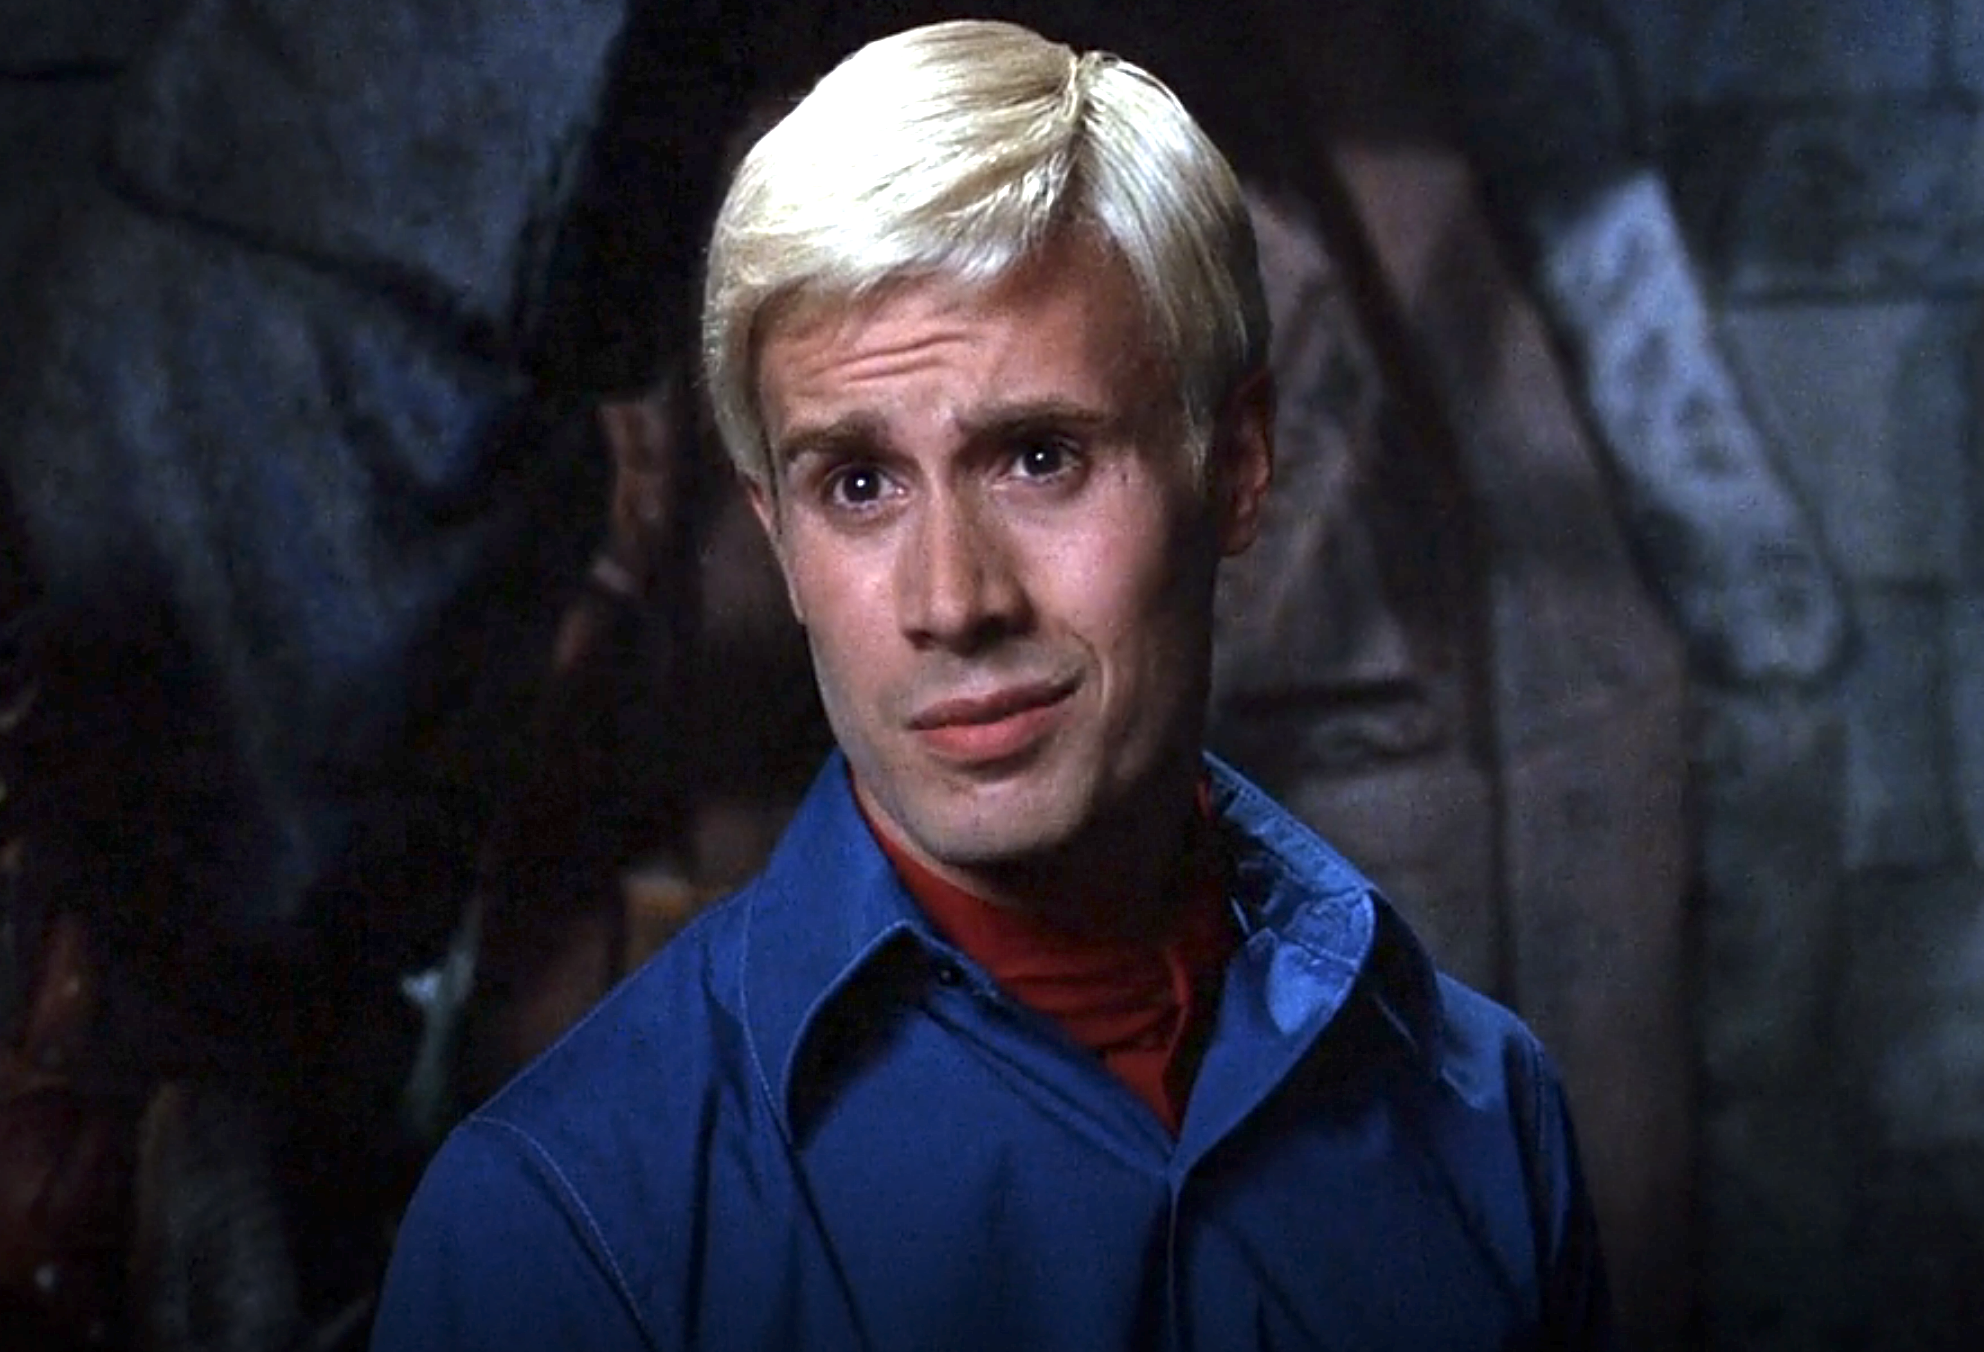 Freddie Prinze Jr. as Fred Jones with shaggy blonde hair and clean shaven face